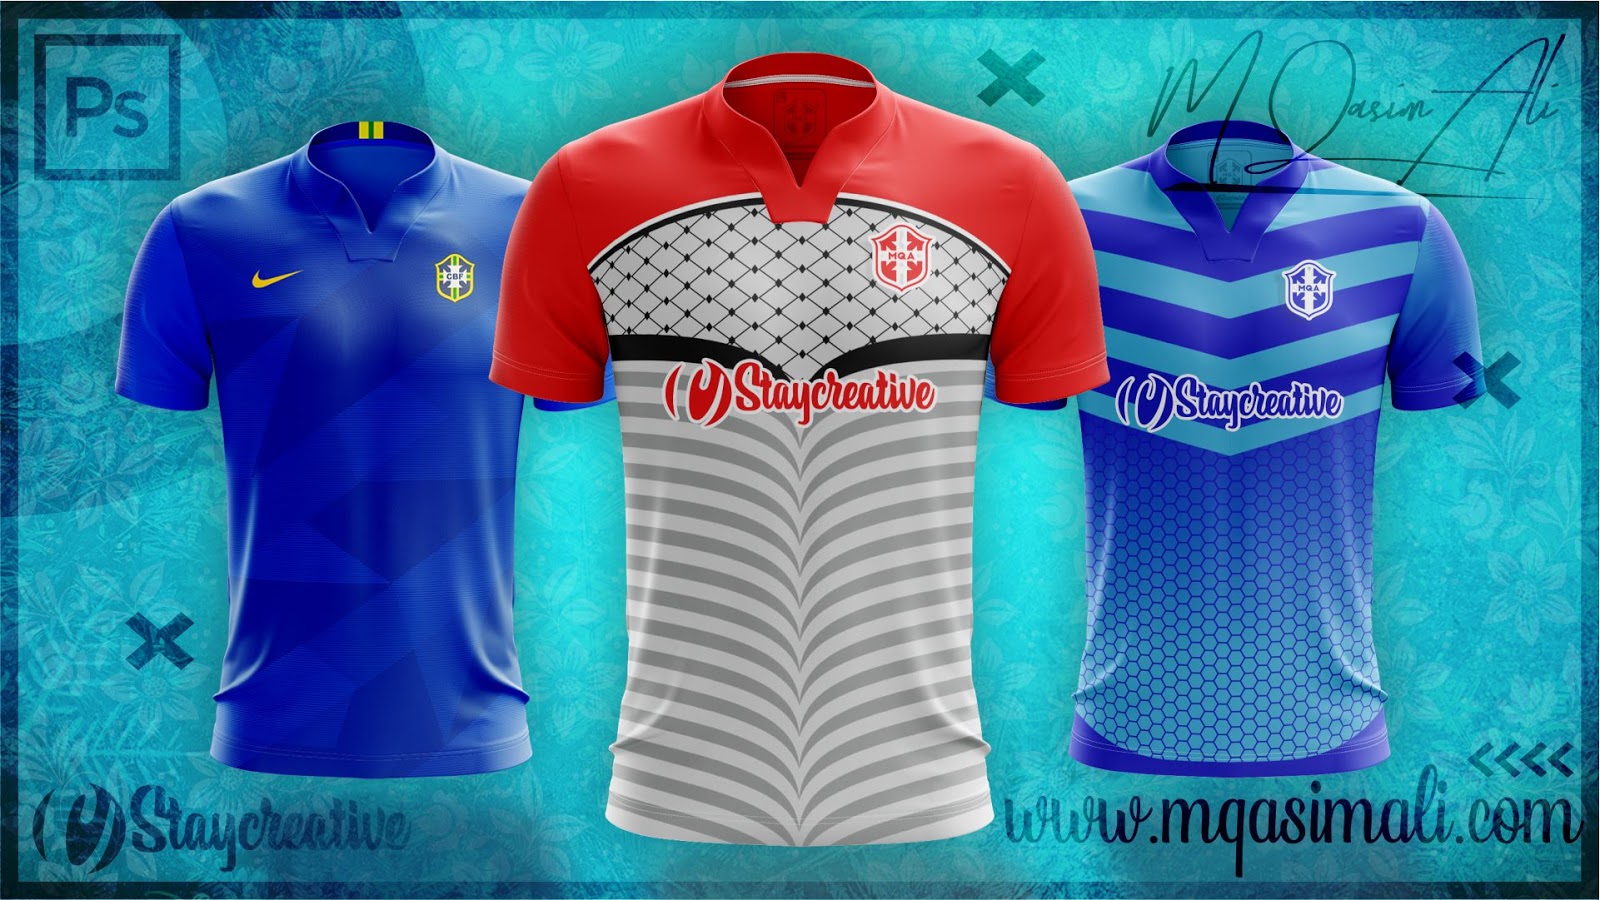 Download Photoshop Sports Templates_Creative Soccer/Football Jersey ...